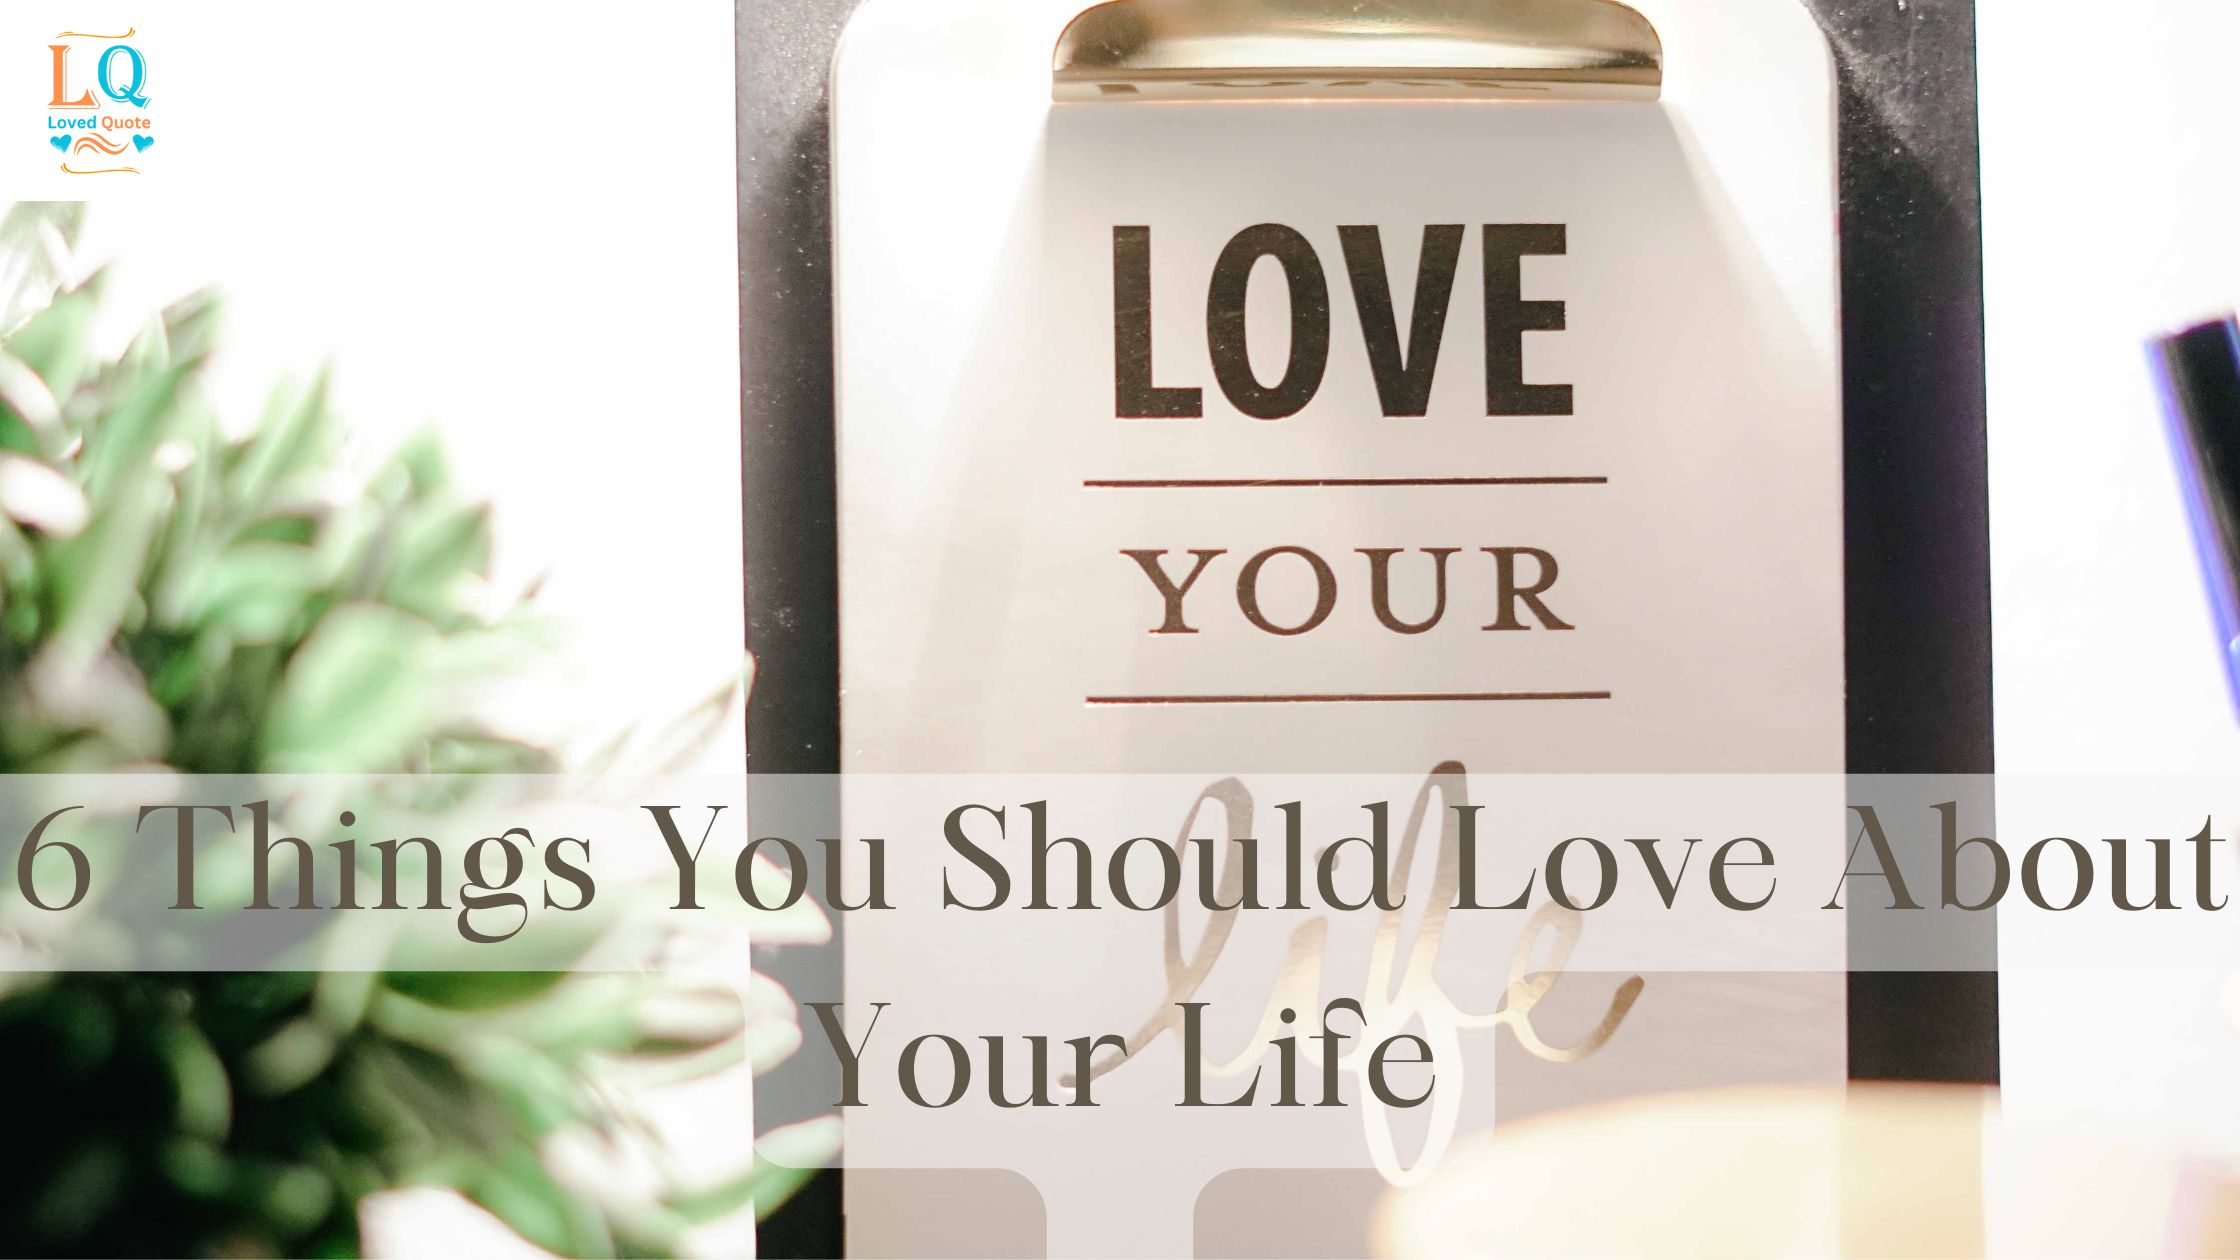 6 Things You Should Love About Your Life